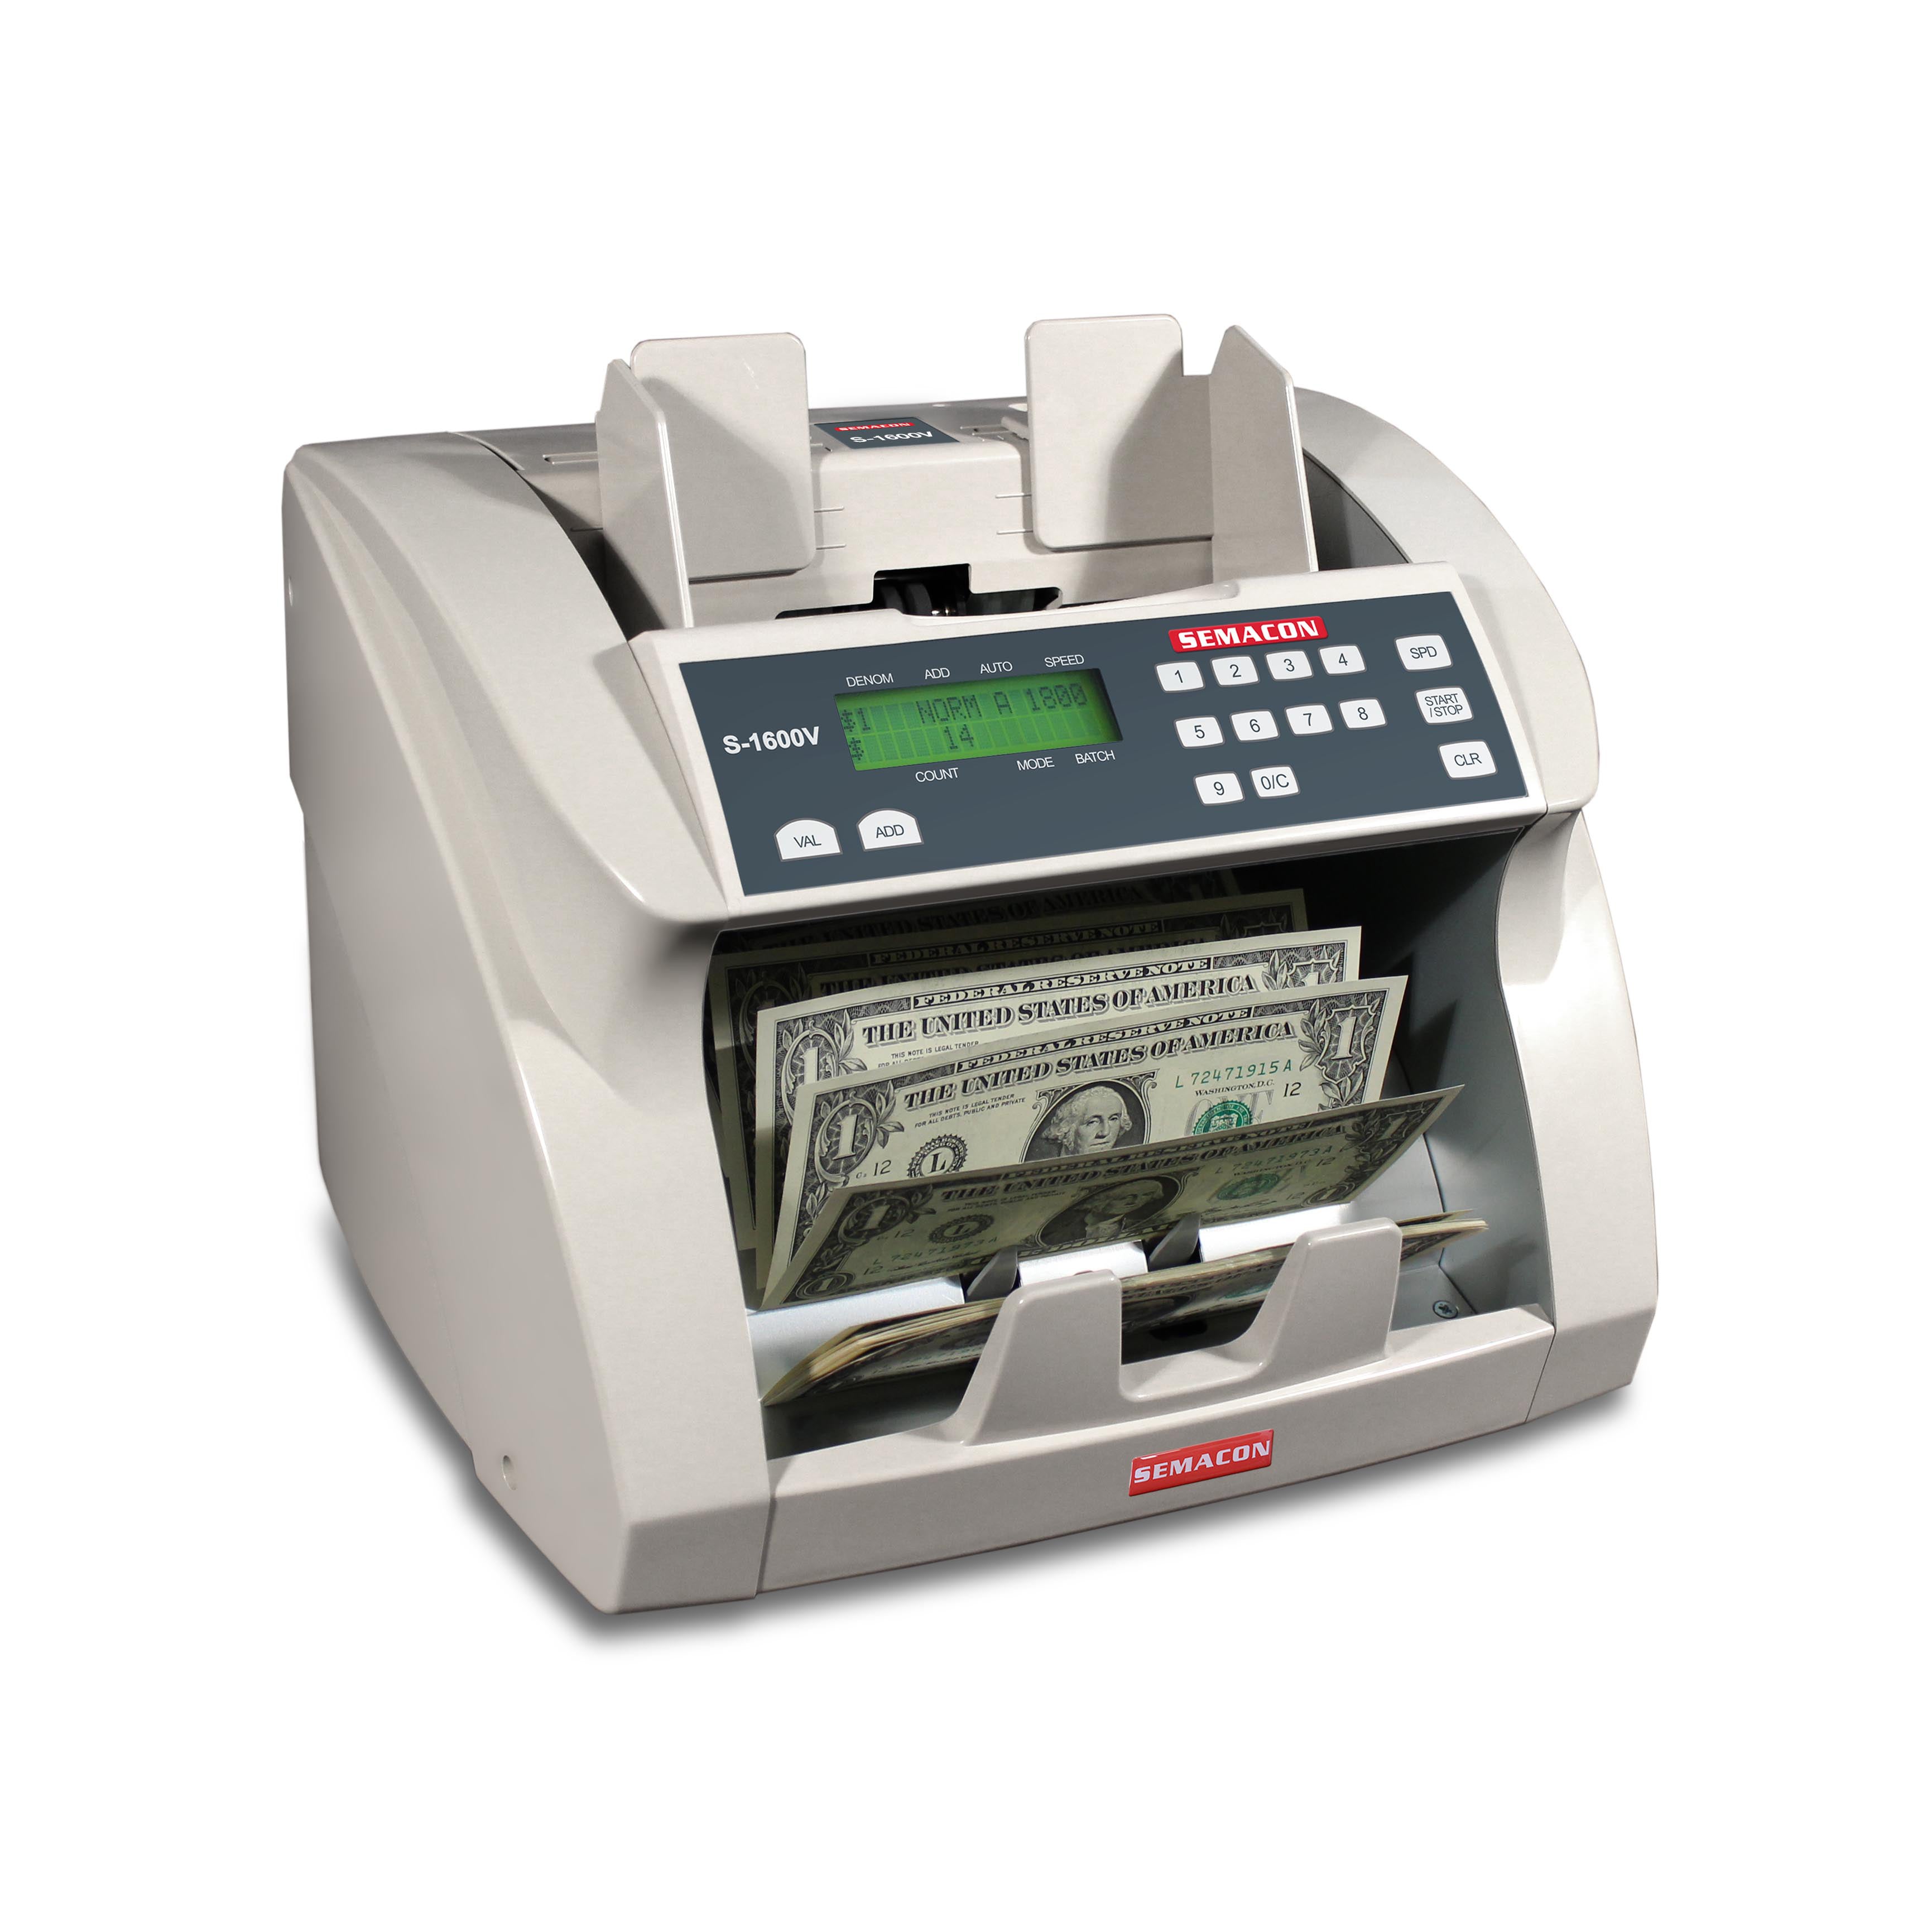 Semacon Premium Bank Grade Currency Counter with Value Mode S-1600V Series Semacon S-1600V  - USASafeAndVault